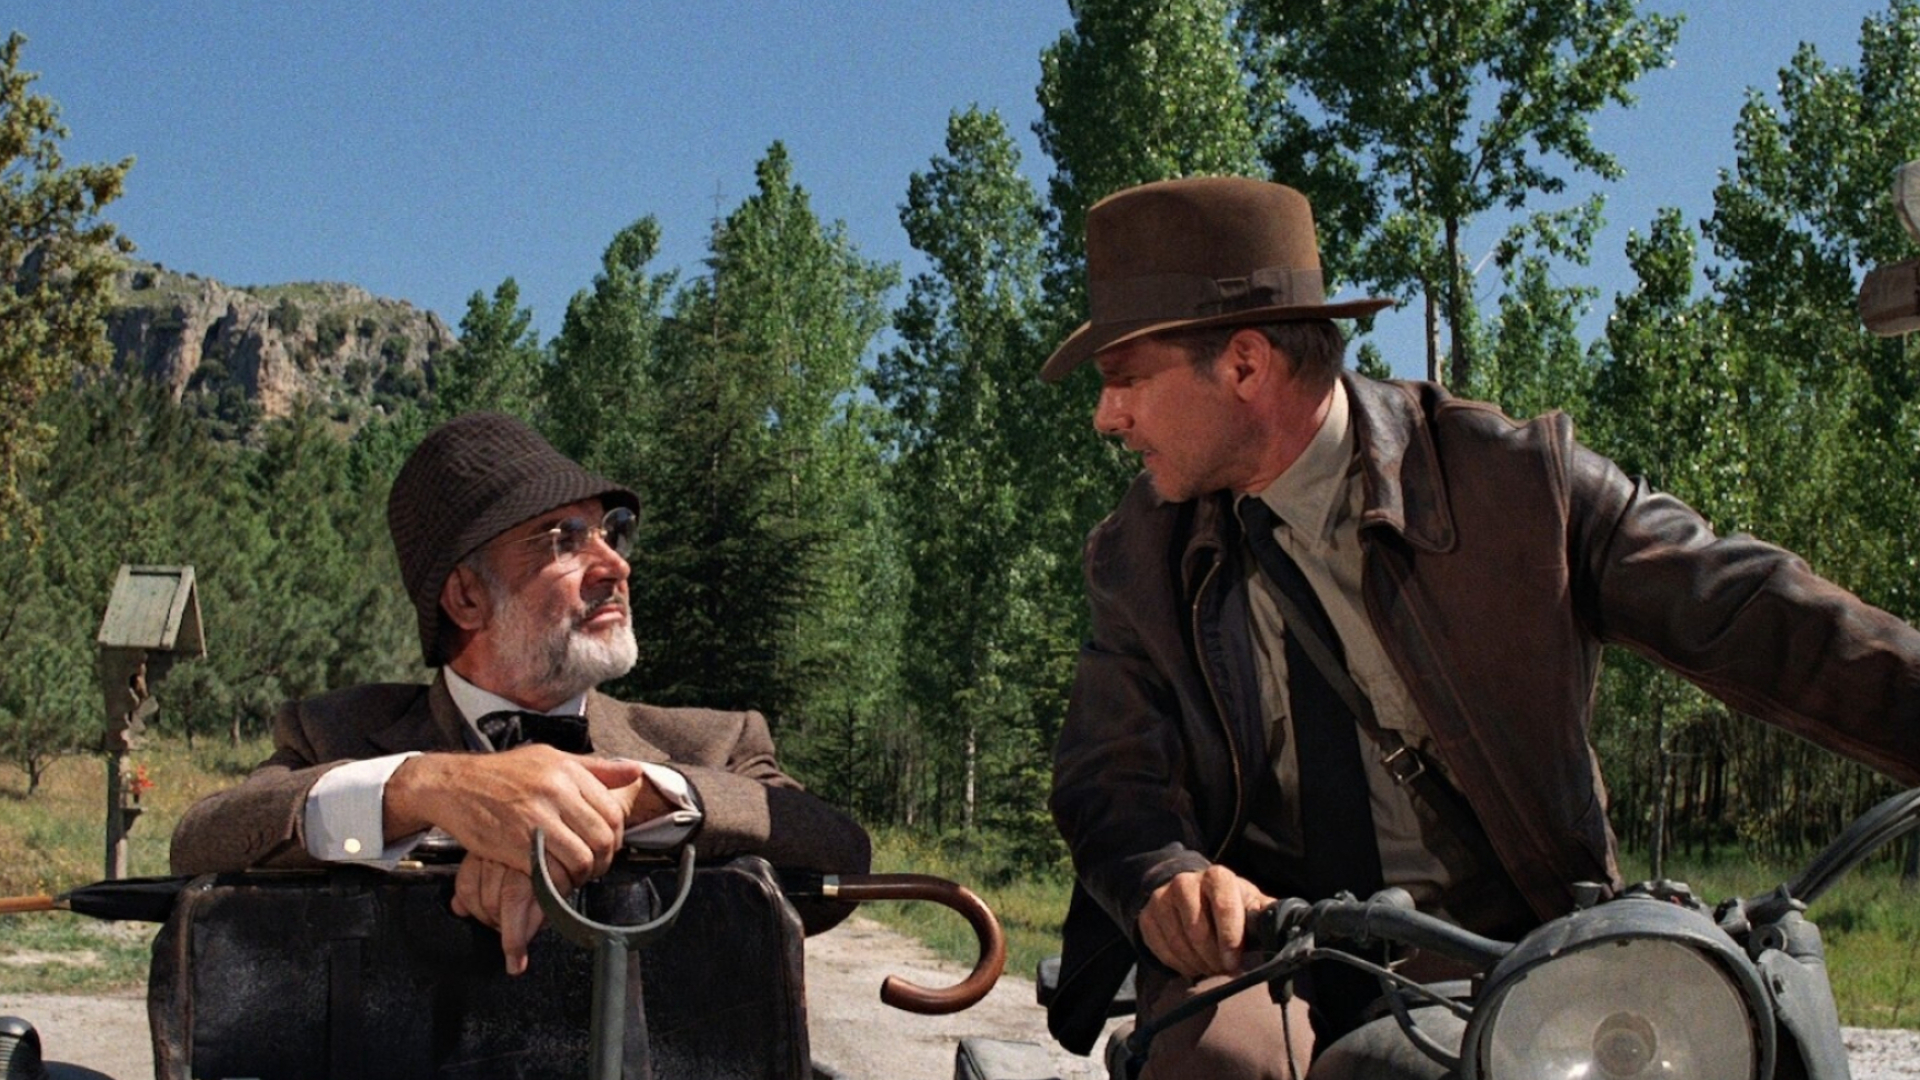 Indiana Jones: The Last Crusade, Harrison Ford and Sean Connery, 1989 movie. 1920x1080 Full HD Wallpaper.